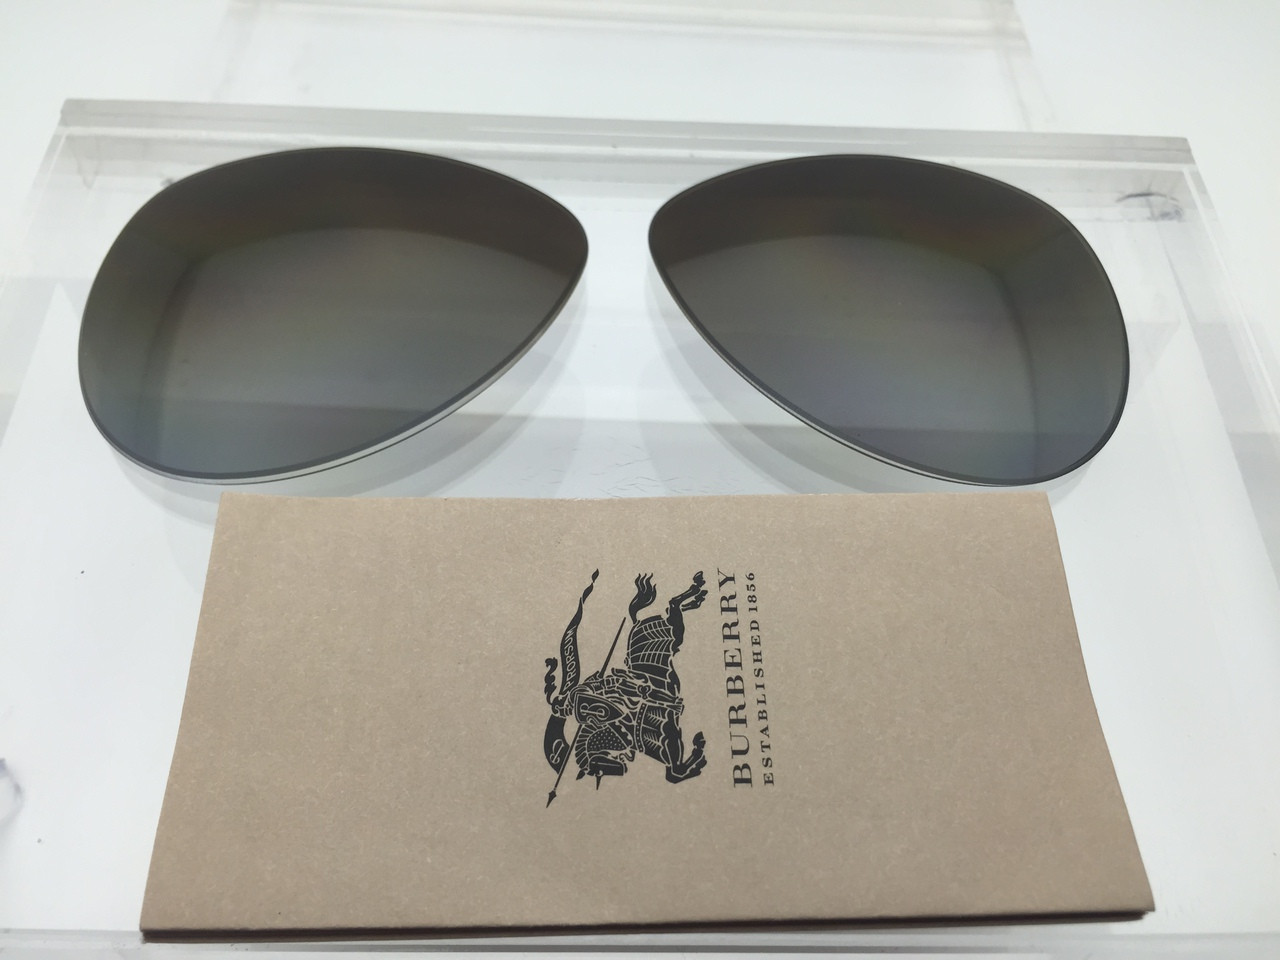 replacement lenses for burberry sunglasses